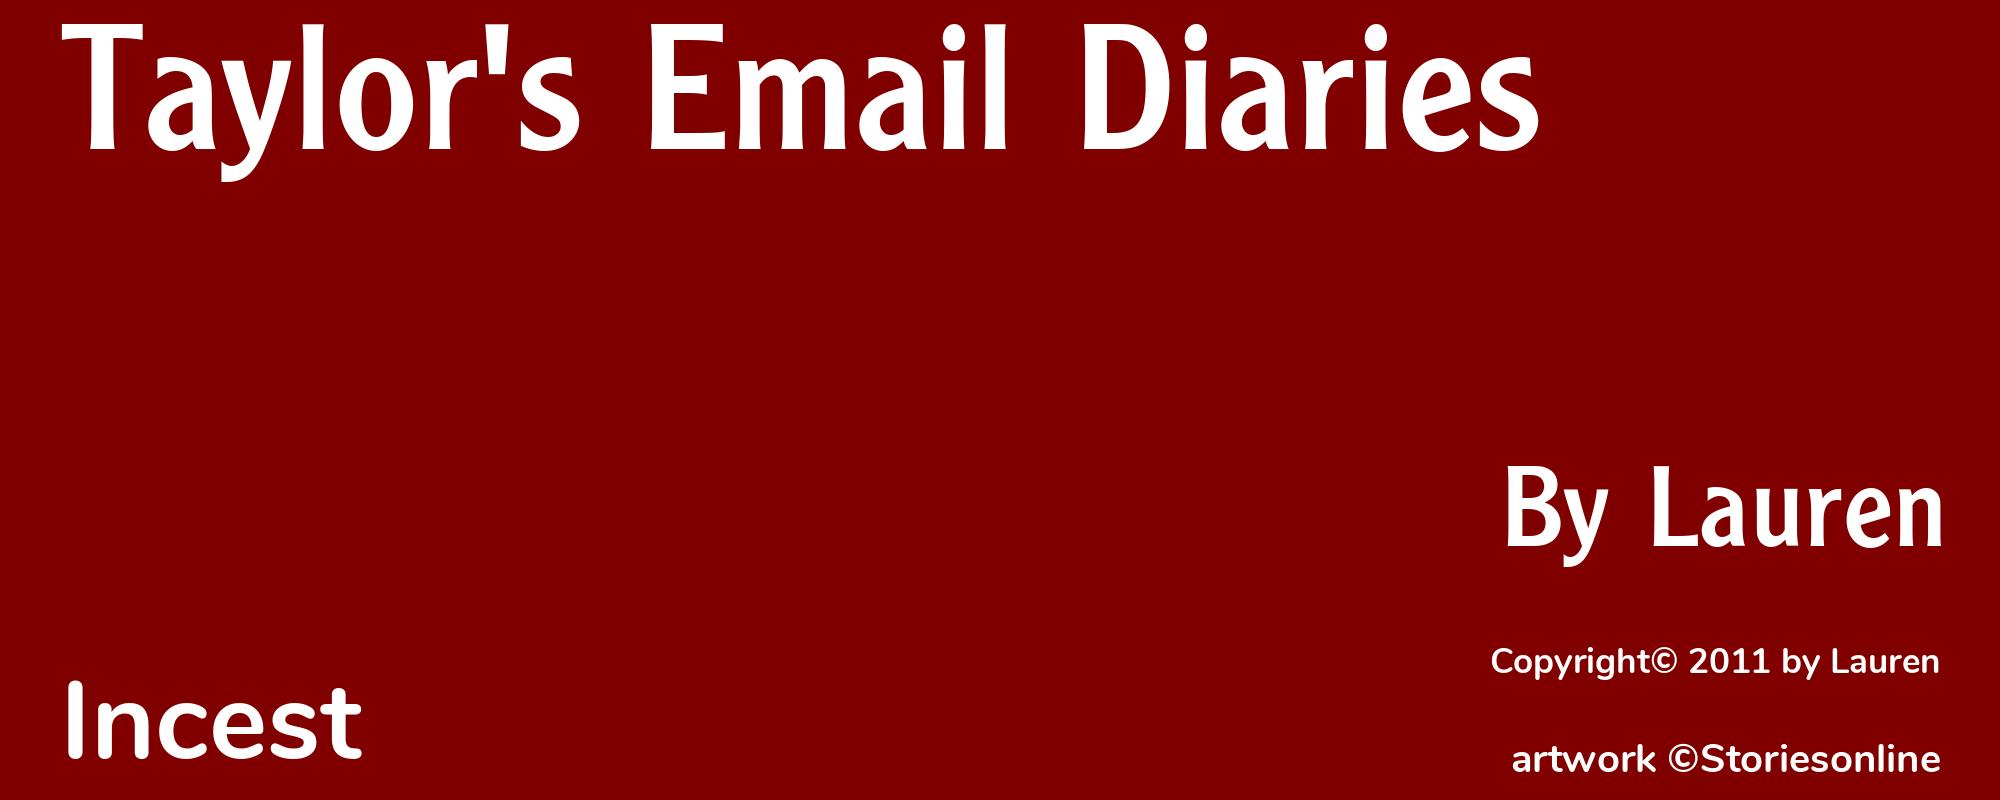 Taylor's Email Diaries - Cover